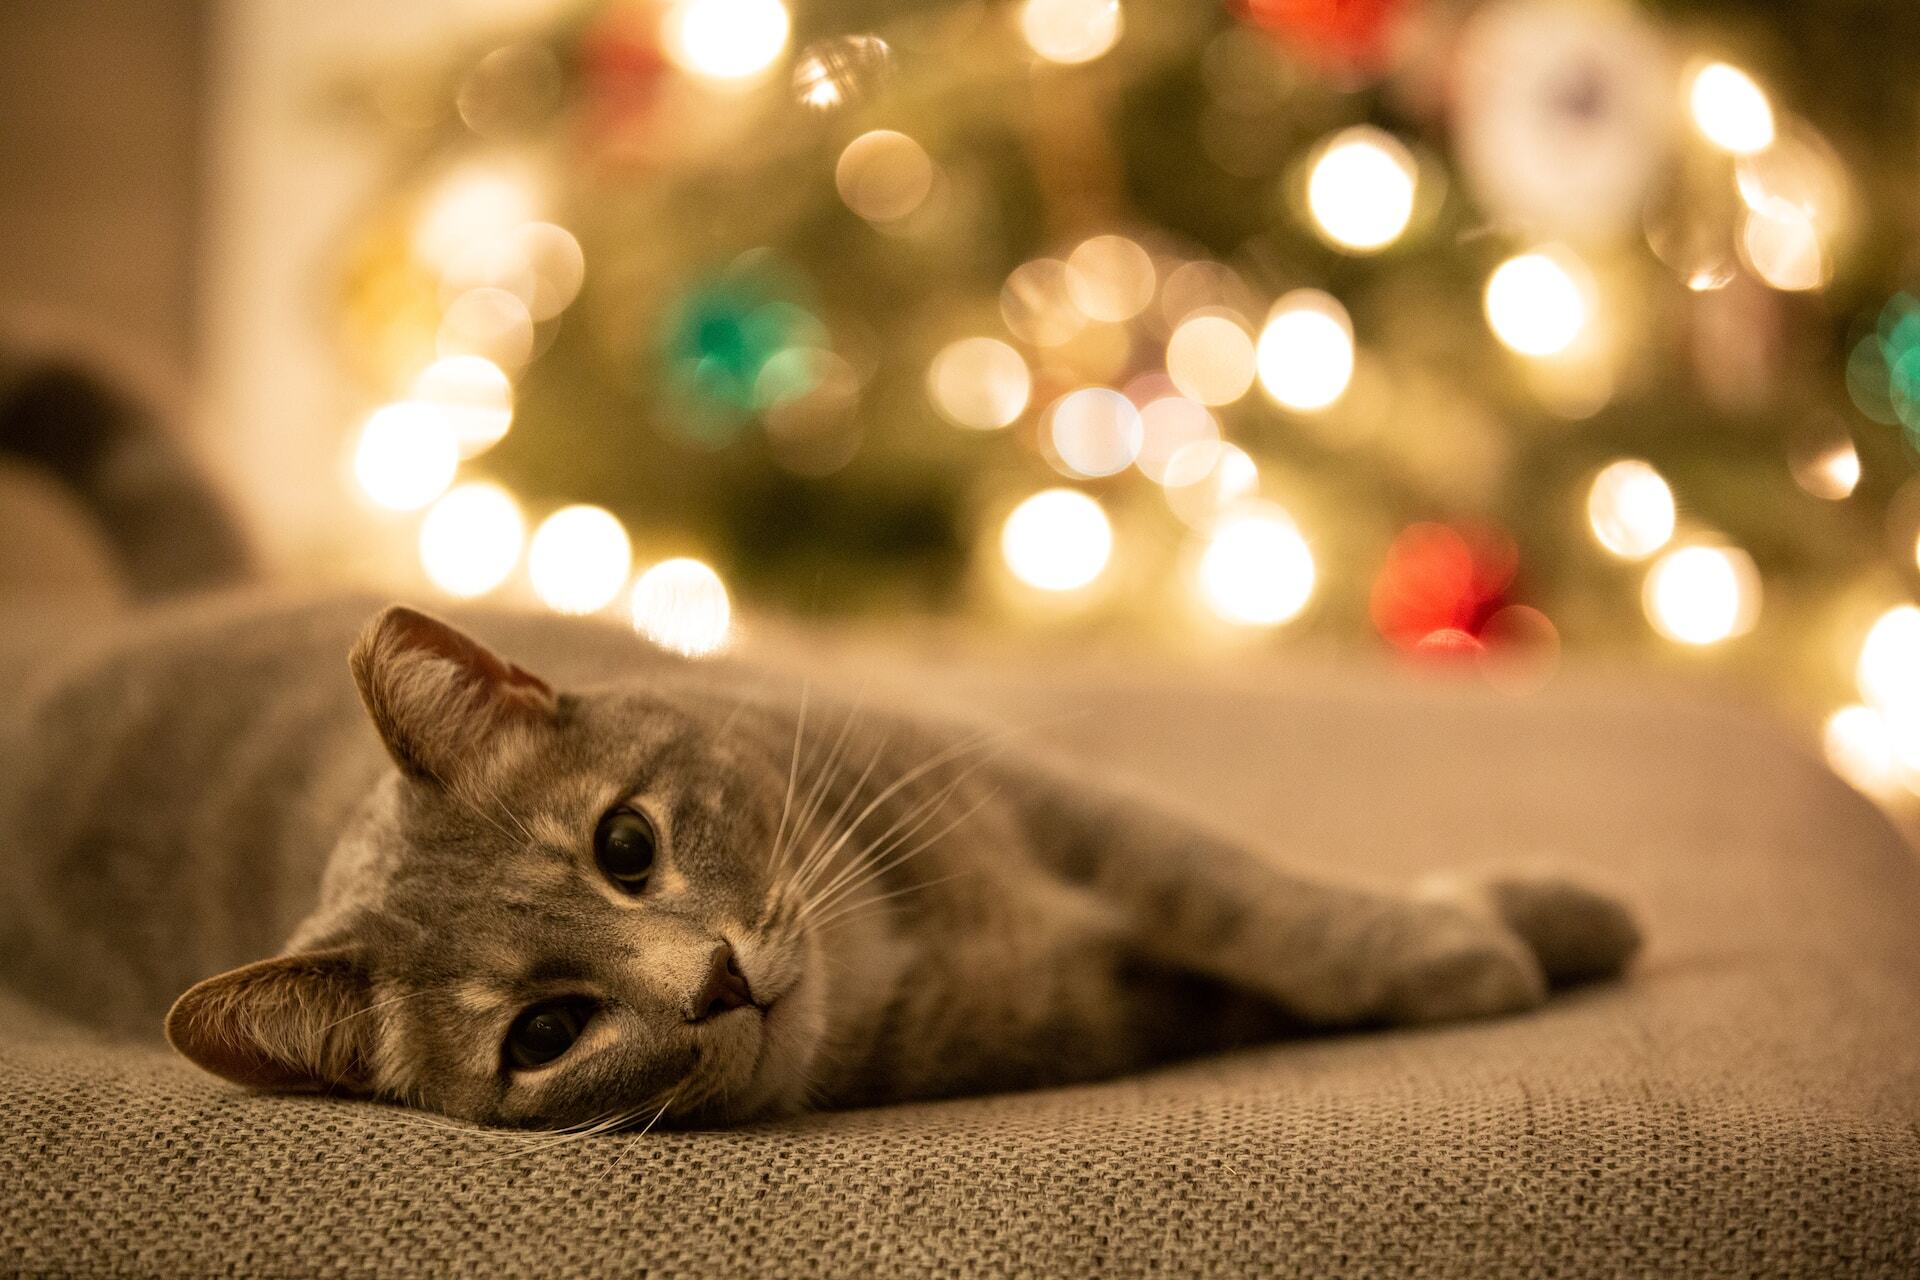 A cat sleeping on a pillow besides a Christmas tree